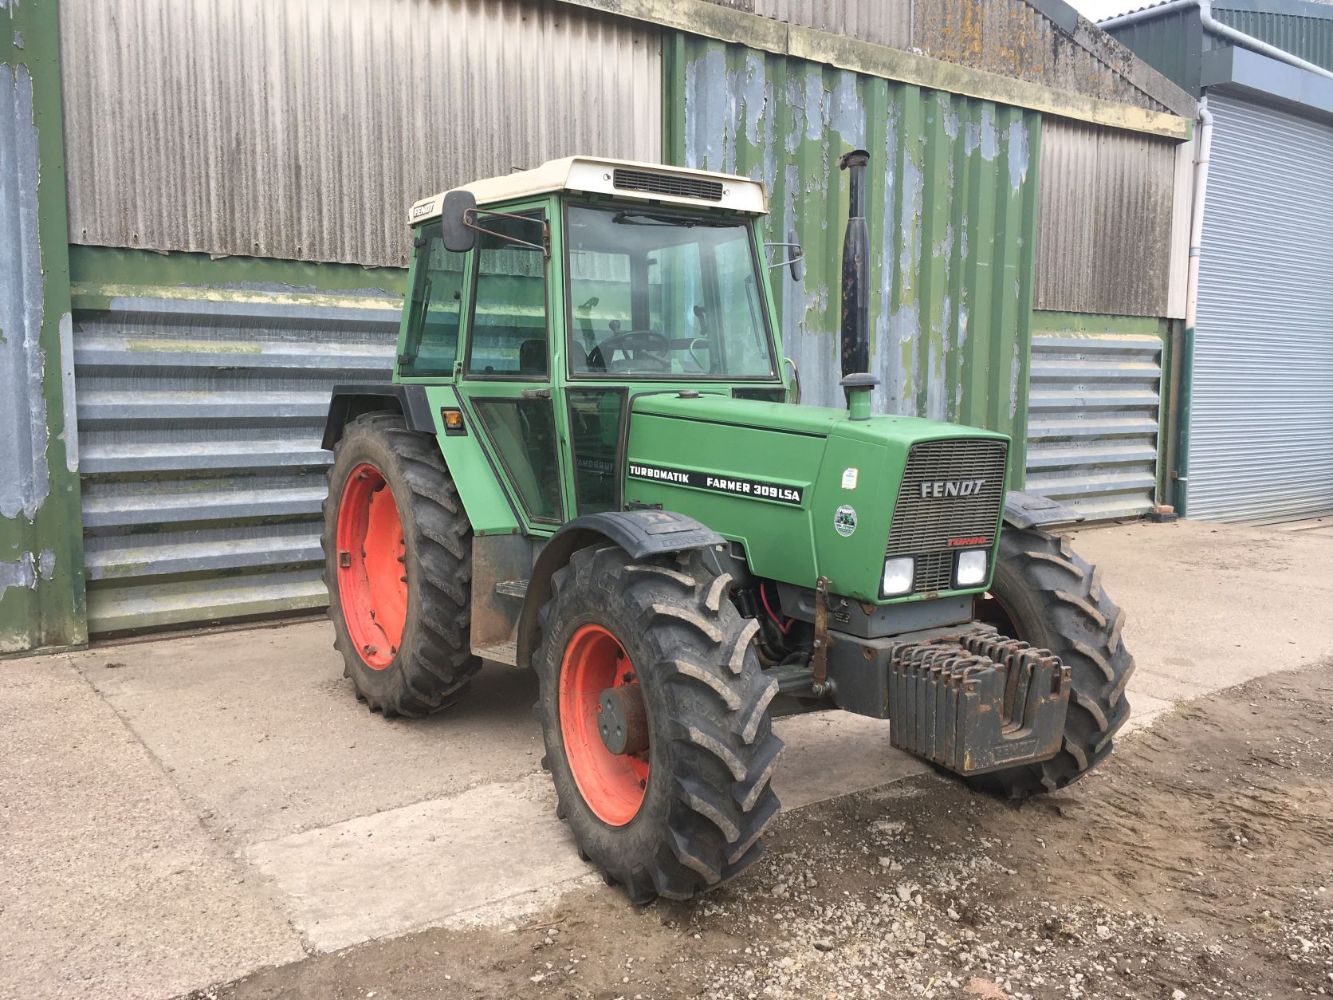 Dispersal Sale by Auction of Modern Farm Machinery and Equipment